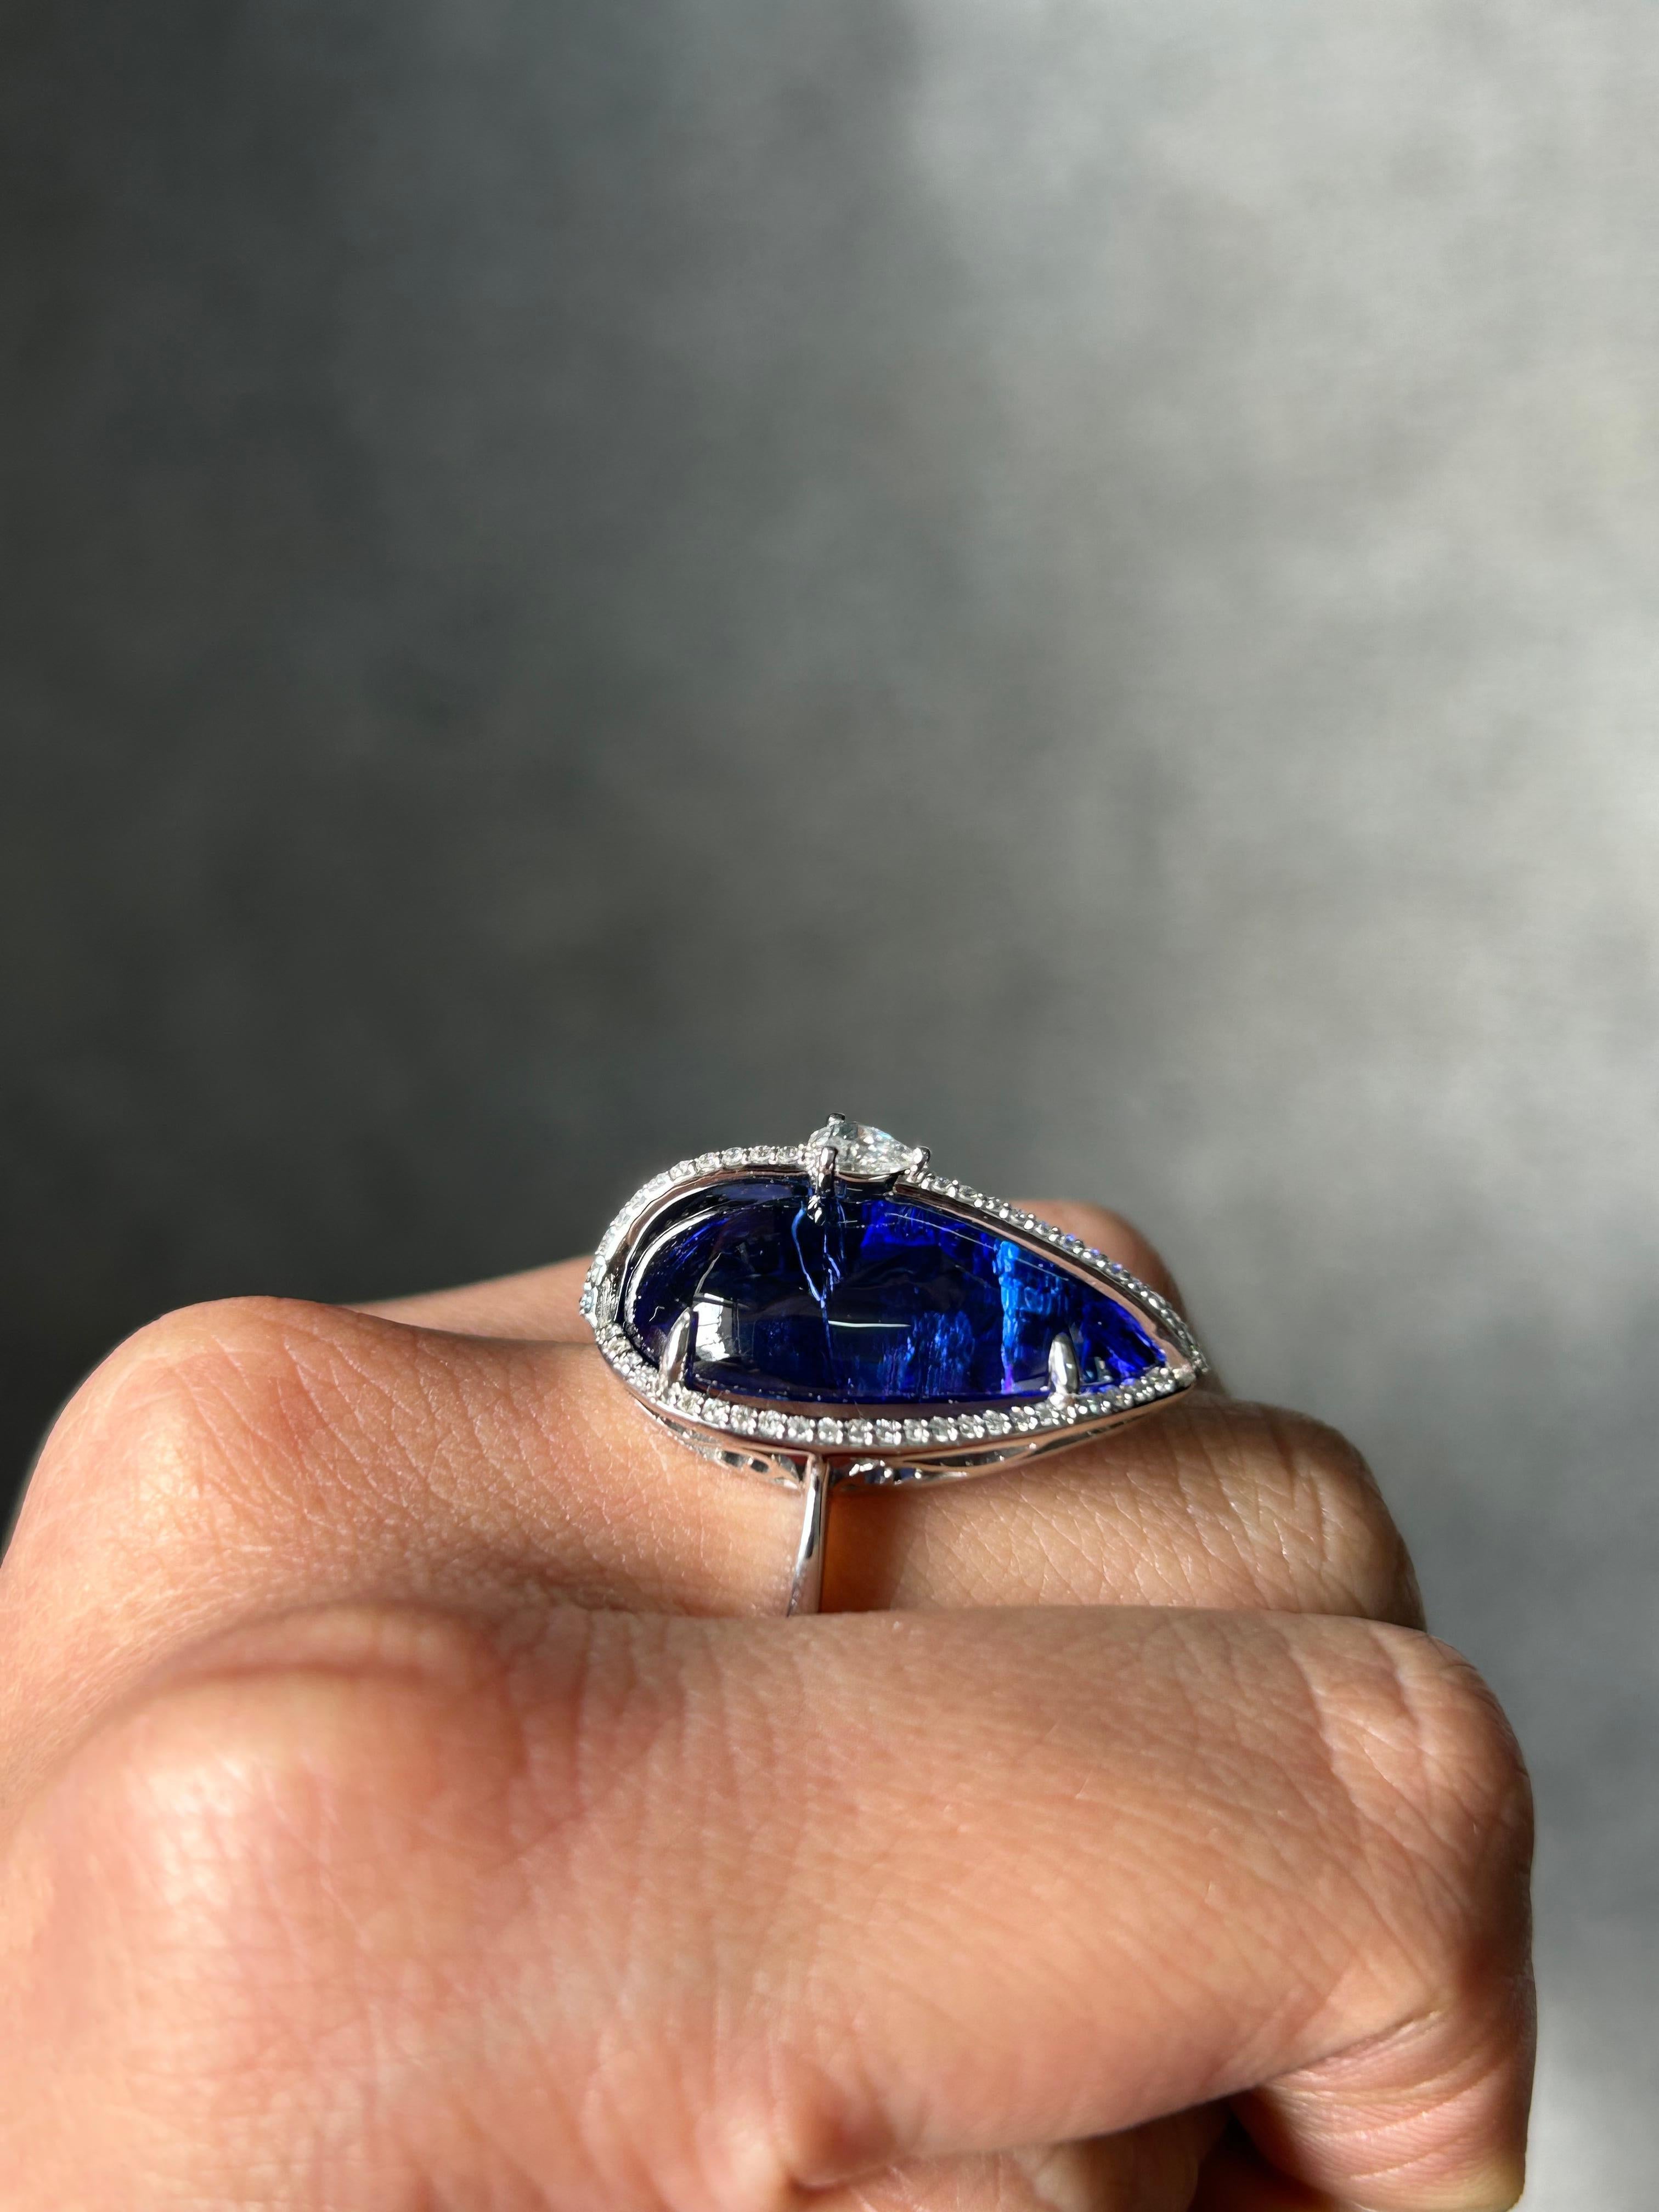 Women's or Men's Certified Natural Pear Shaped Cabochon Tanzanite Ring with VVS Diamond For Sale